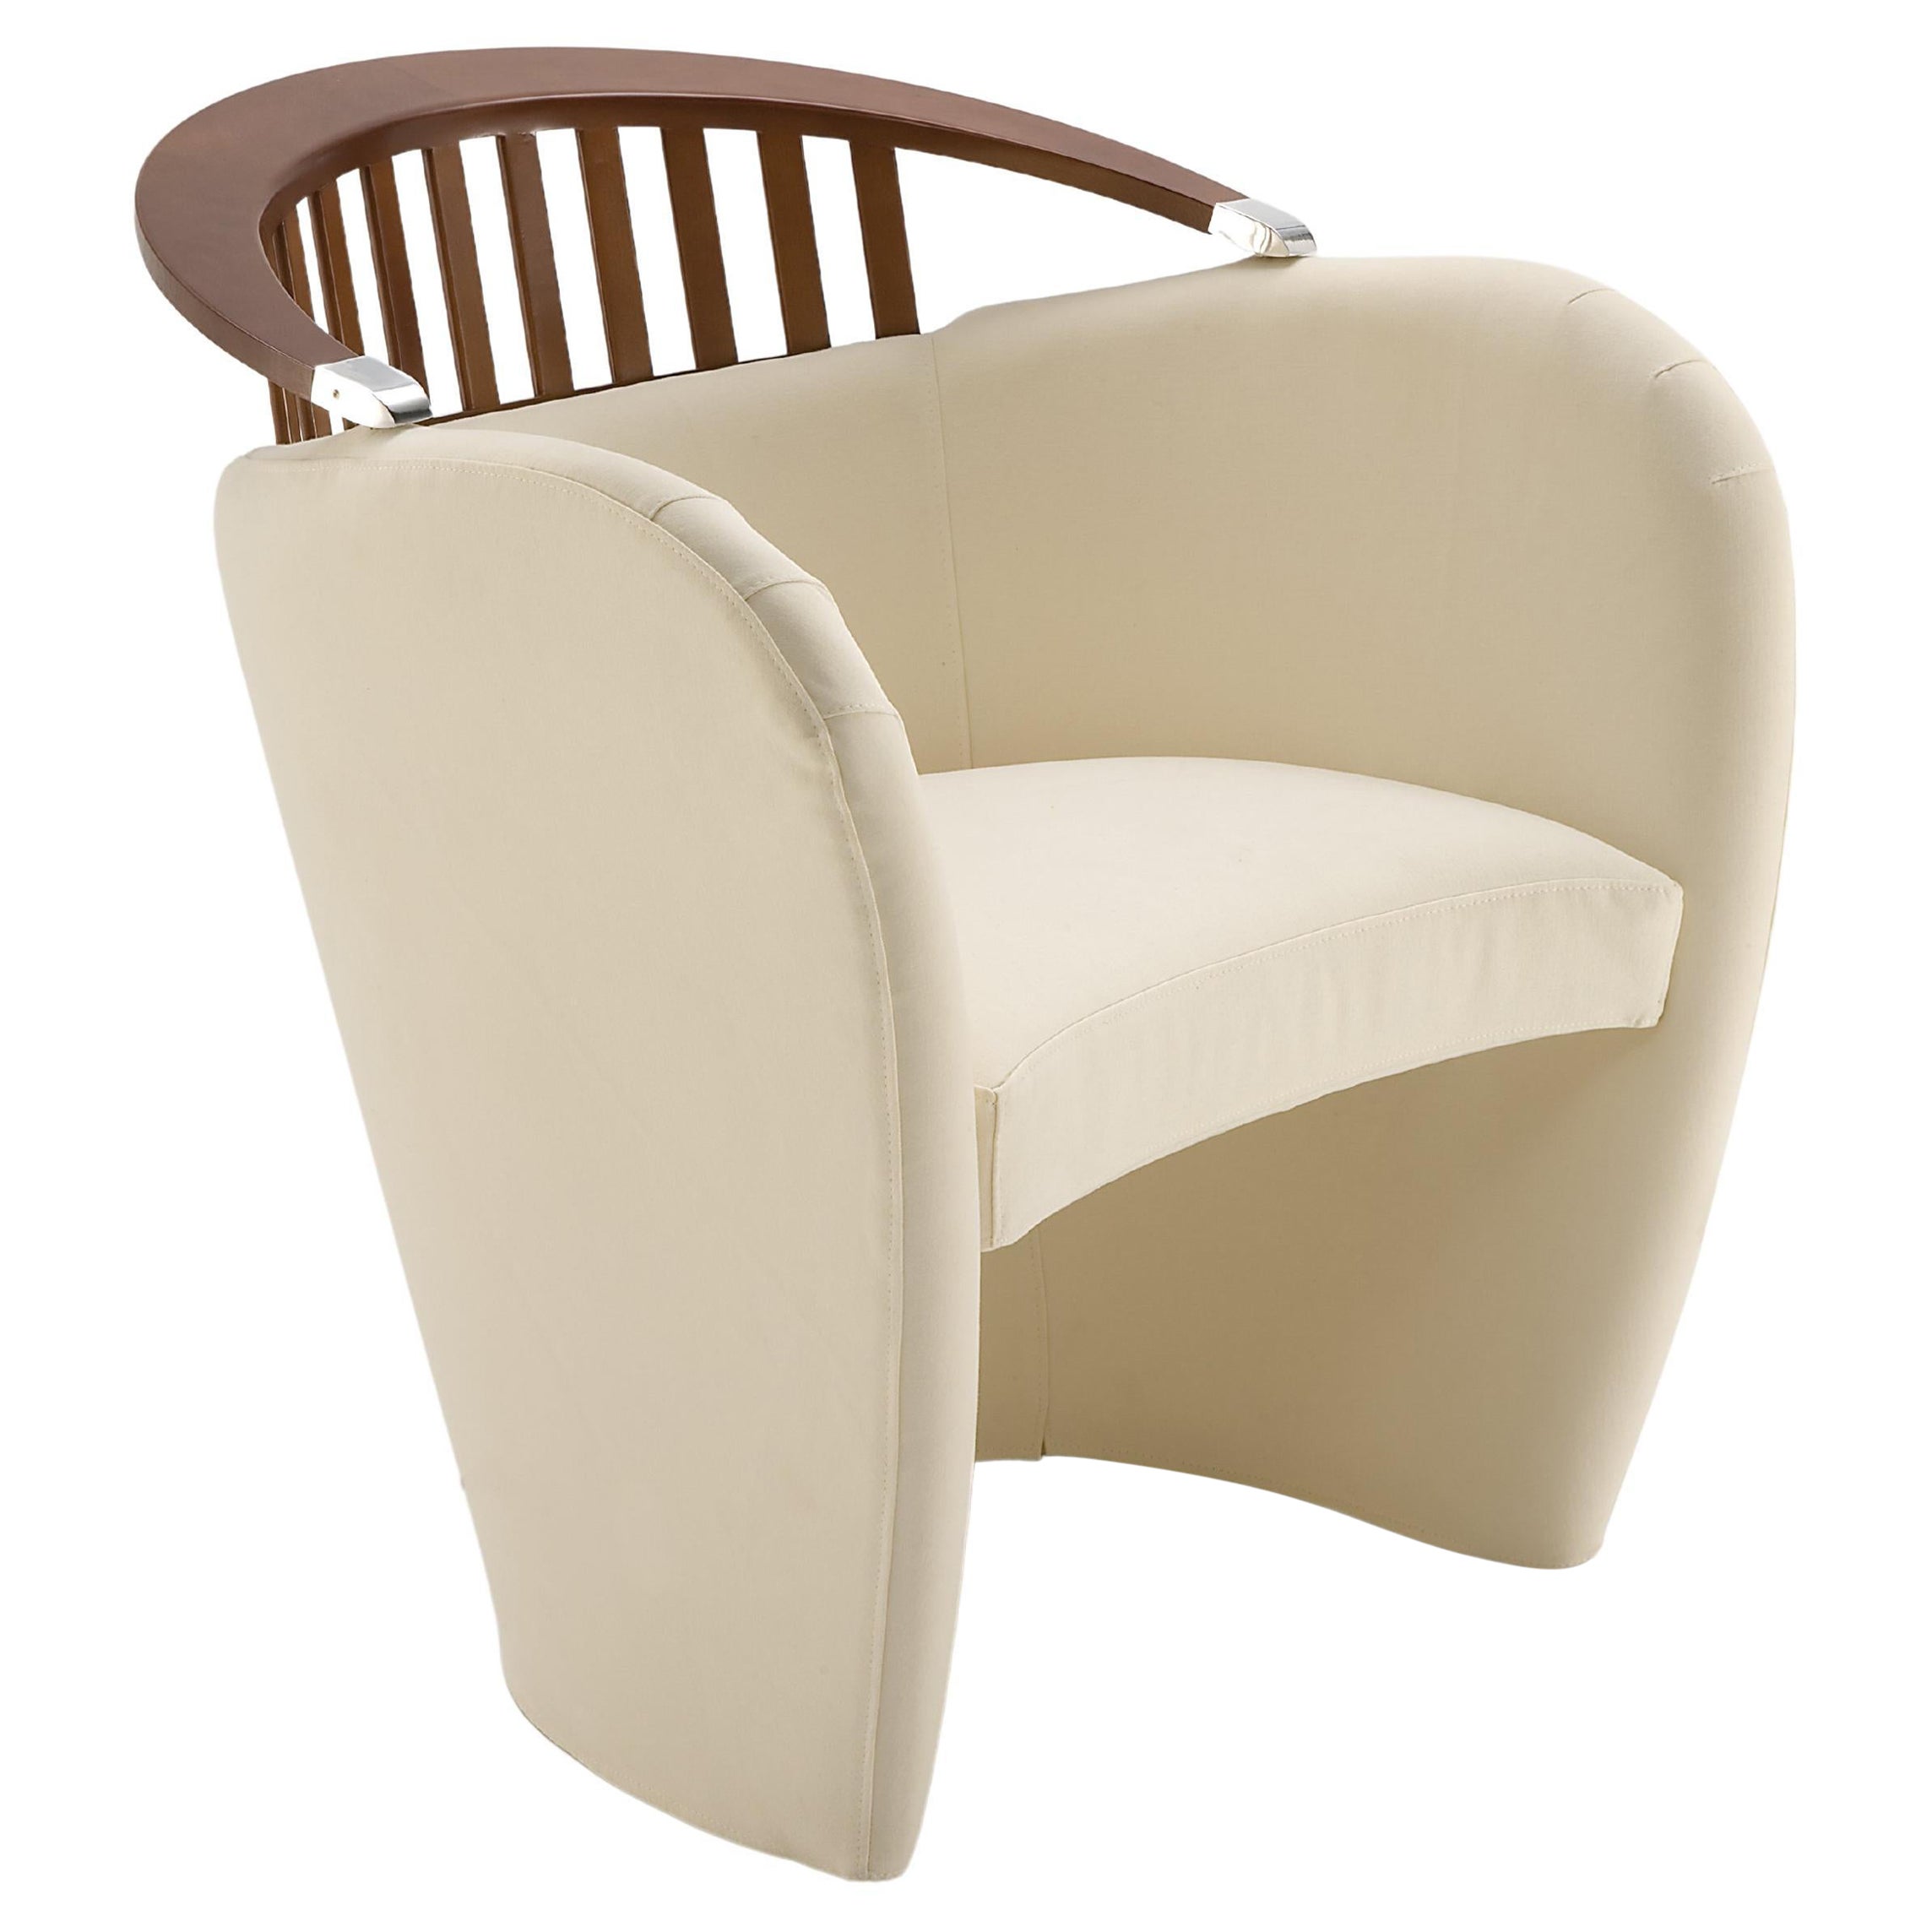 Giovannetti, Armchair with Wooden Backrest from the 90s by M. Matteini, Nausicaa For Sale